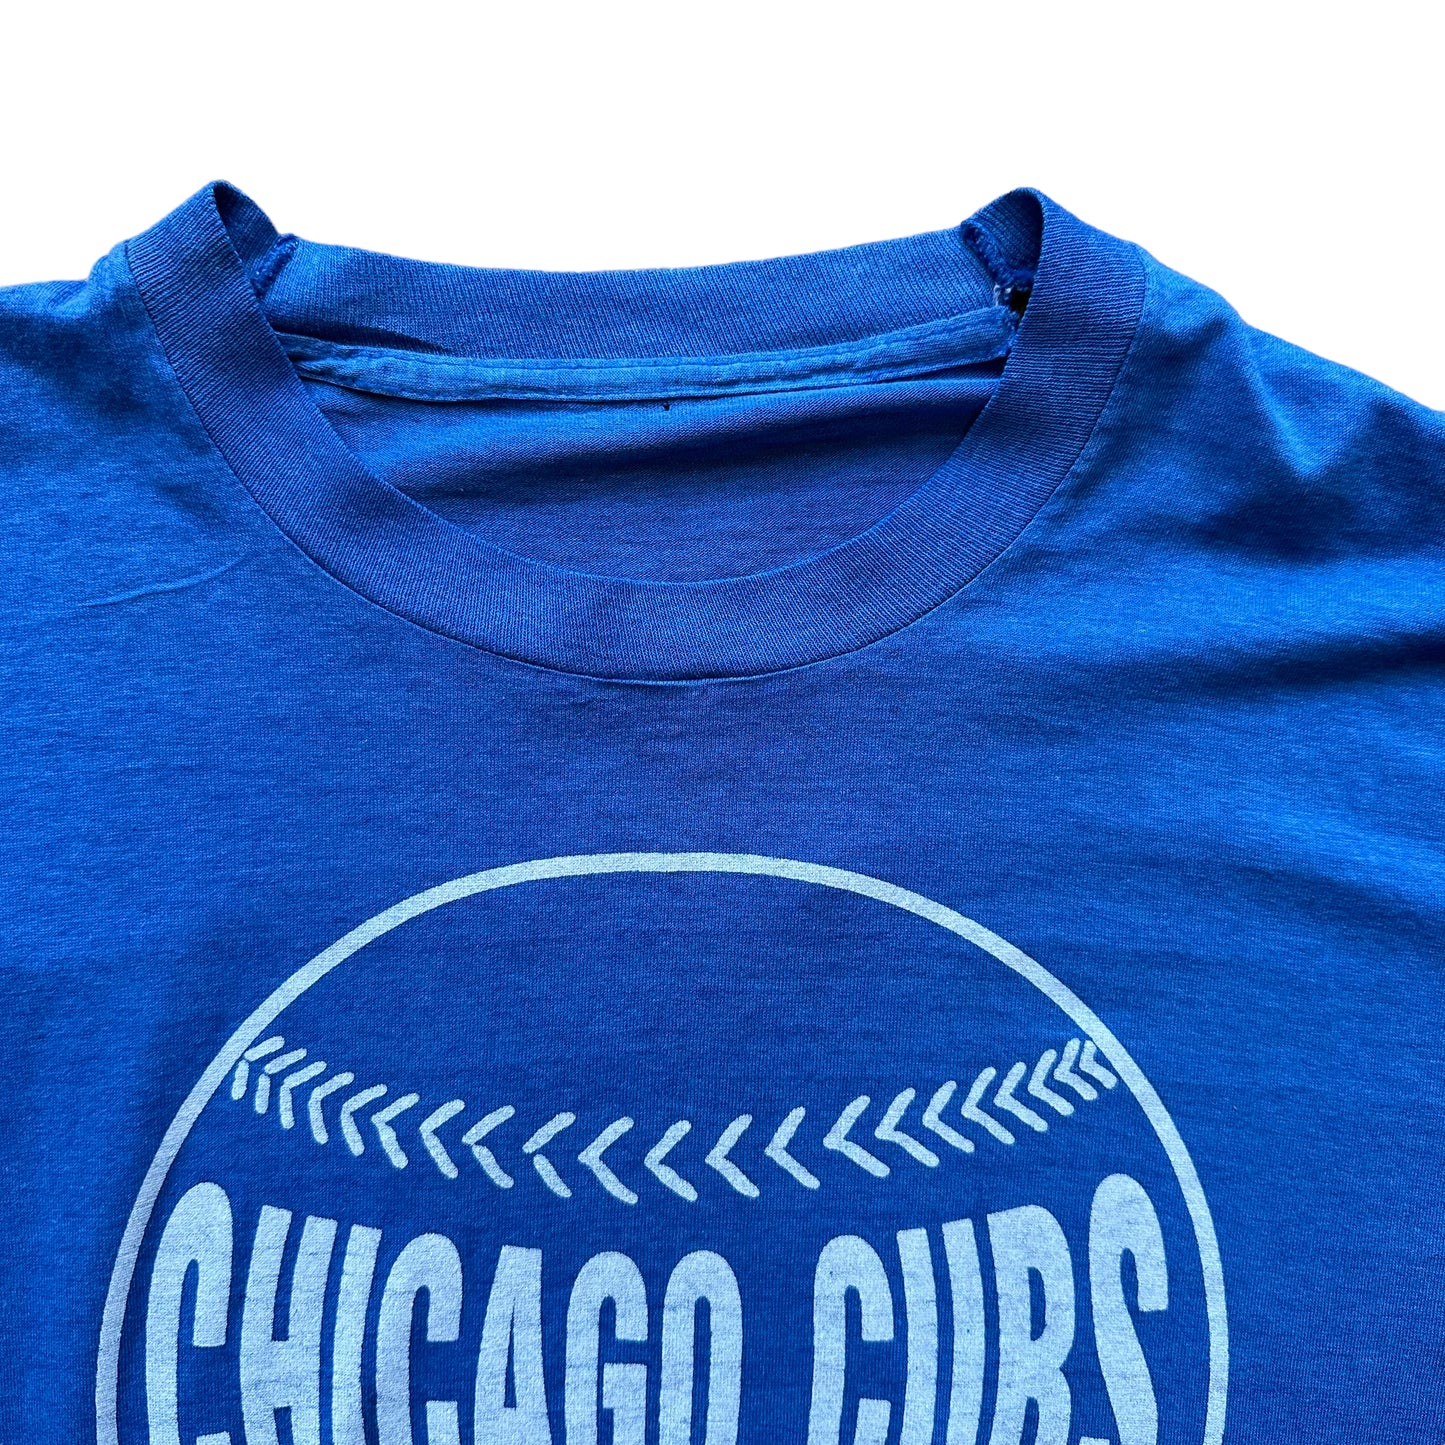 Upper Front View of Vintage Chicago Cubs Tee SZ L | Vintage Baseball T-Shirts Seattle | Barn Owl Vintage Tees Seattle